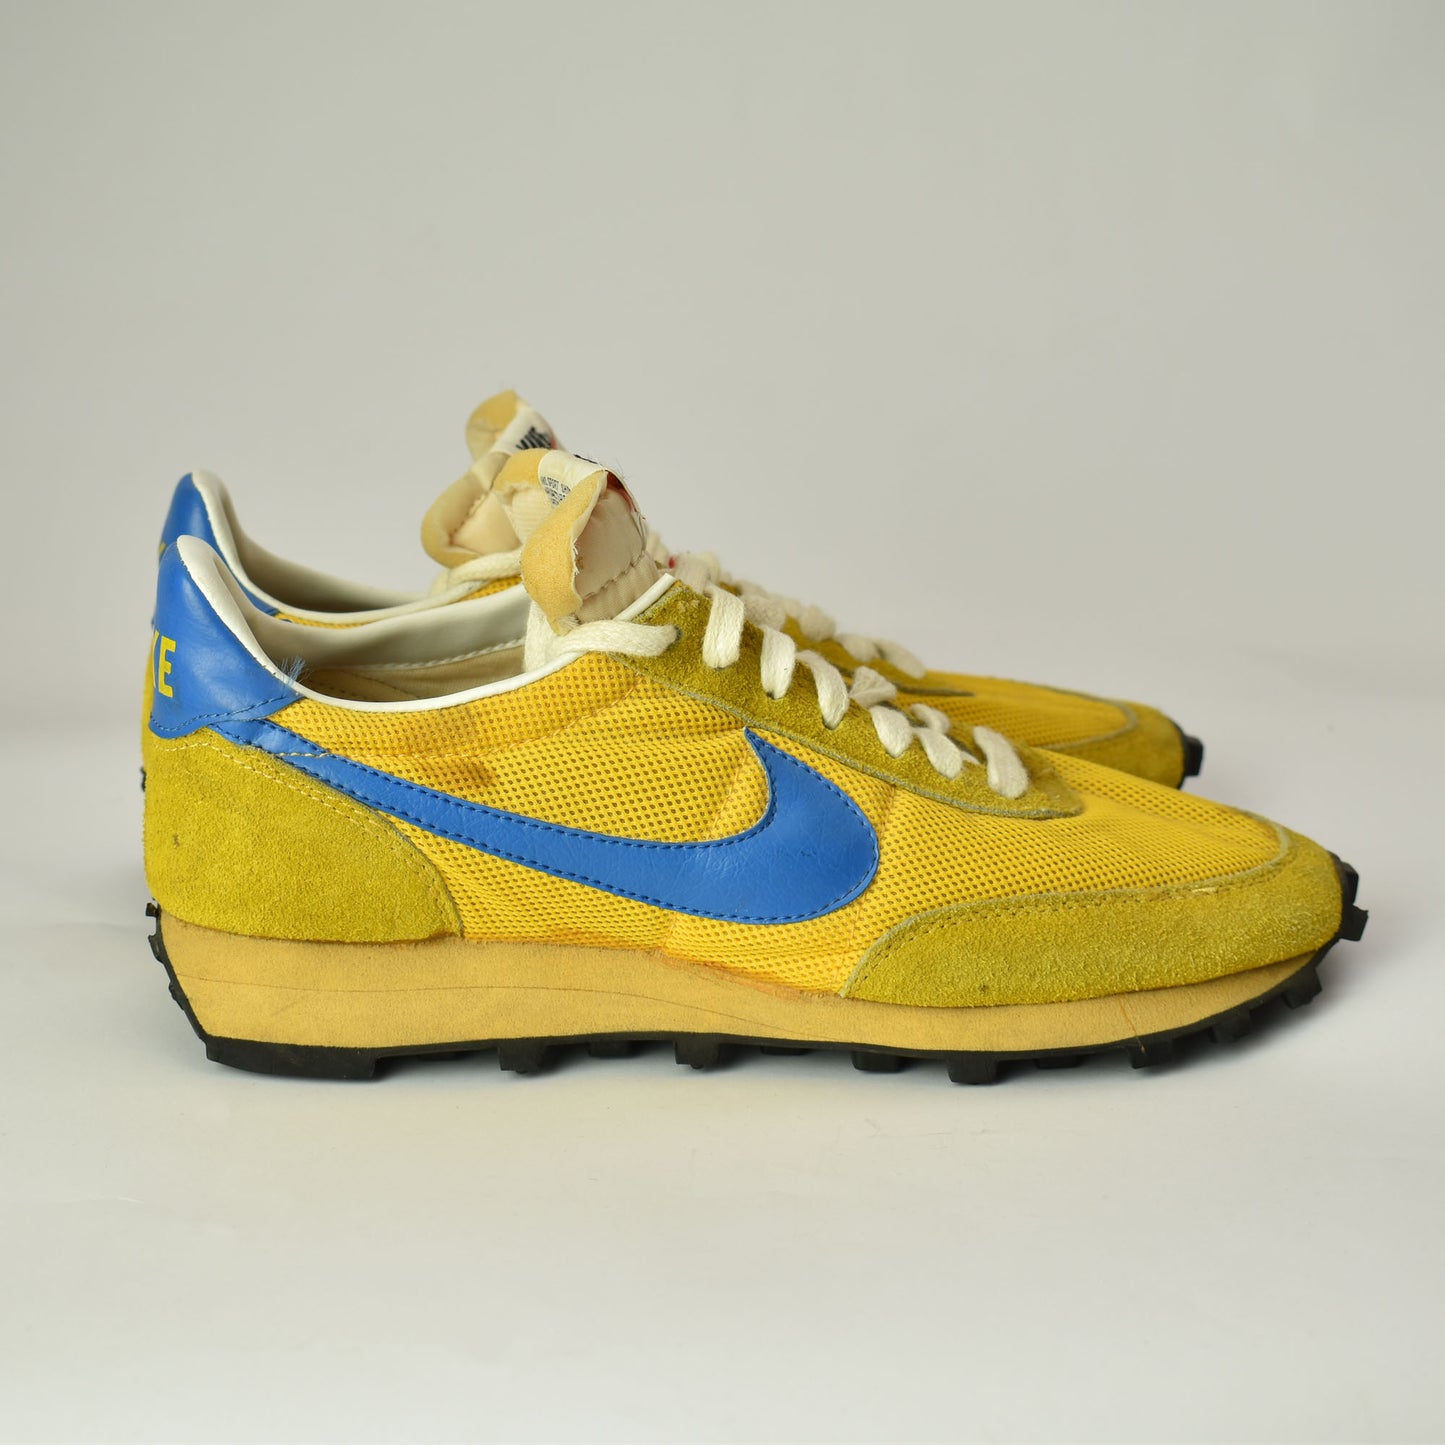 Vintage 1979 Nike Waffle Tailwind Trainers Sneakers Yellow Shoes Made in Korea Size 7